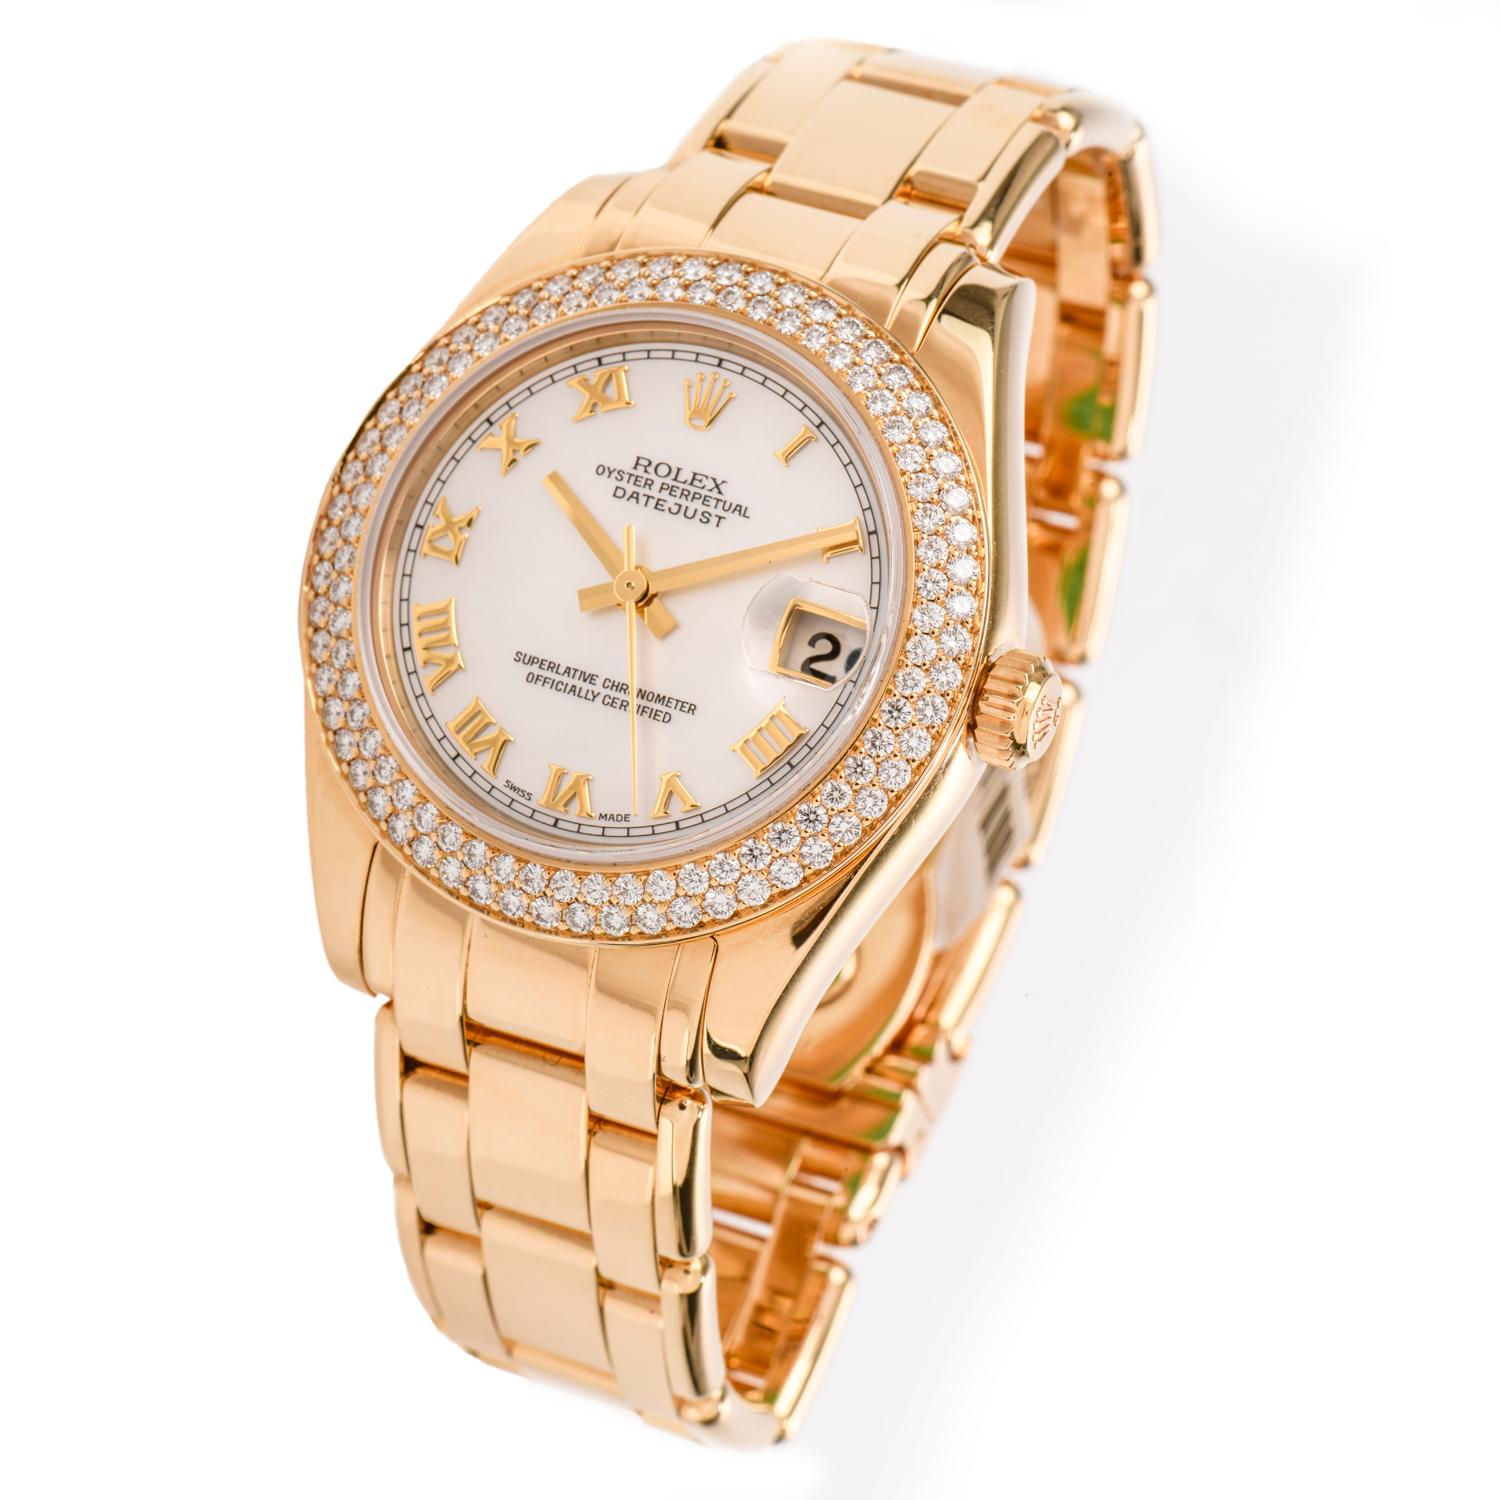 Taille ronde Rolex Montre Pearlmaster en or 18 carats pour femme, taille moyenne, réf. 81338